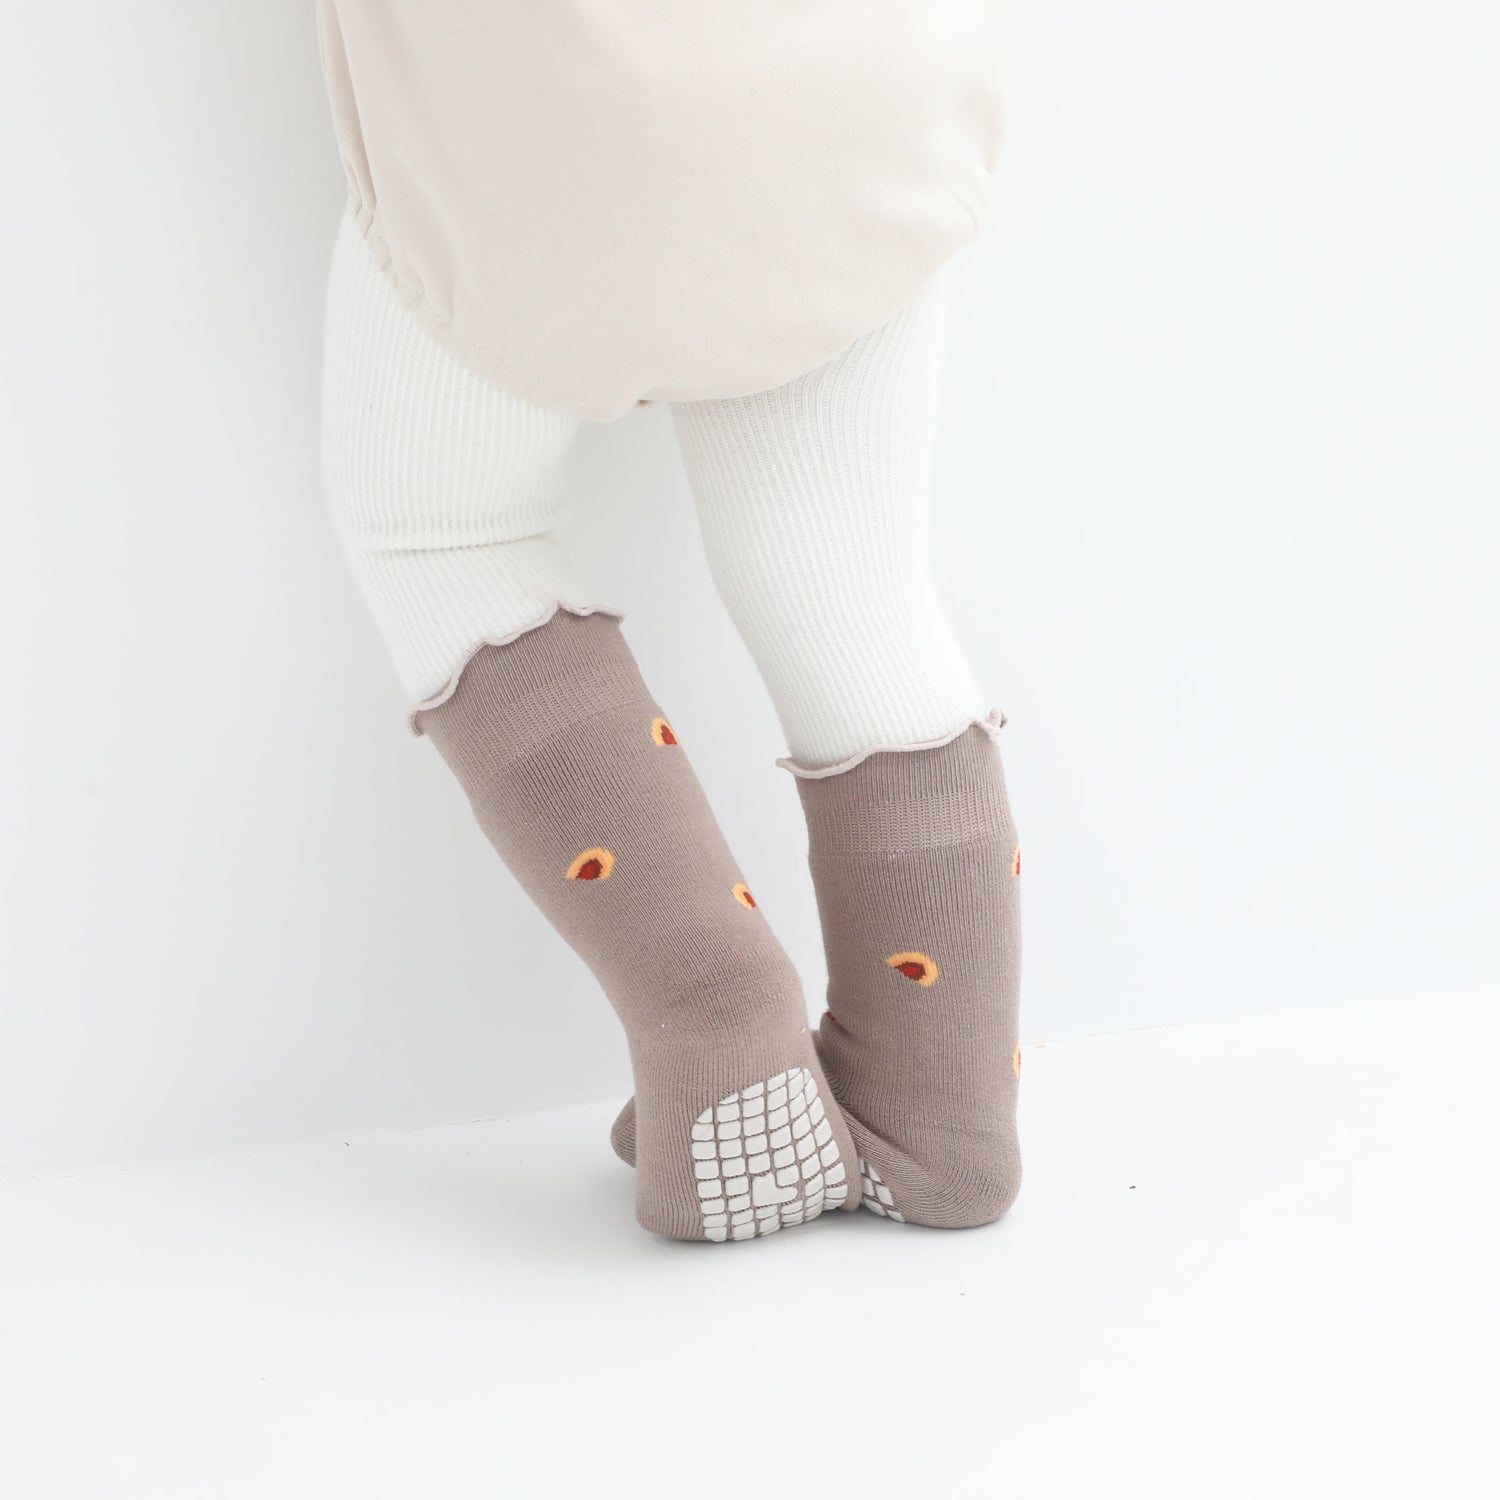 Low-cut floor socks with anti-slip design for toddlers